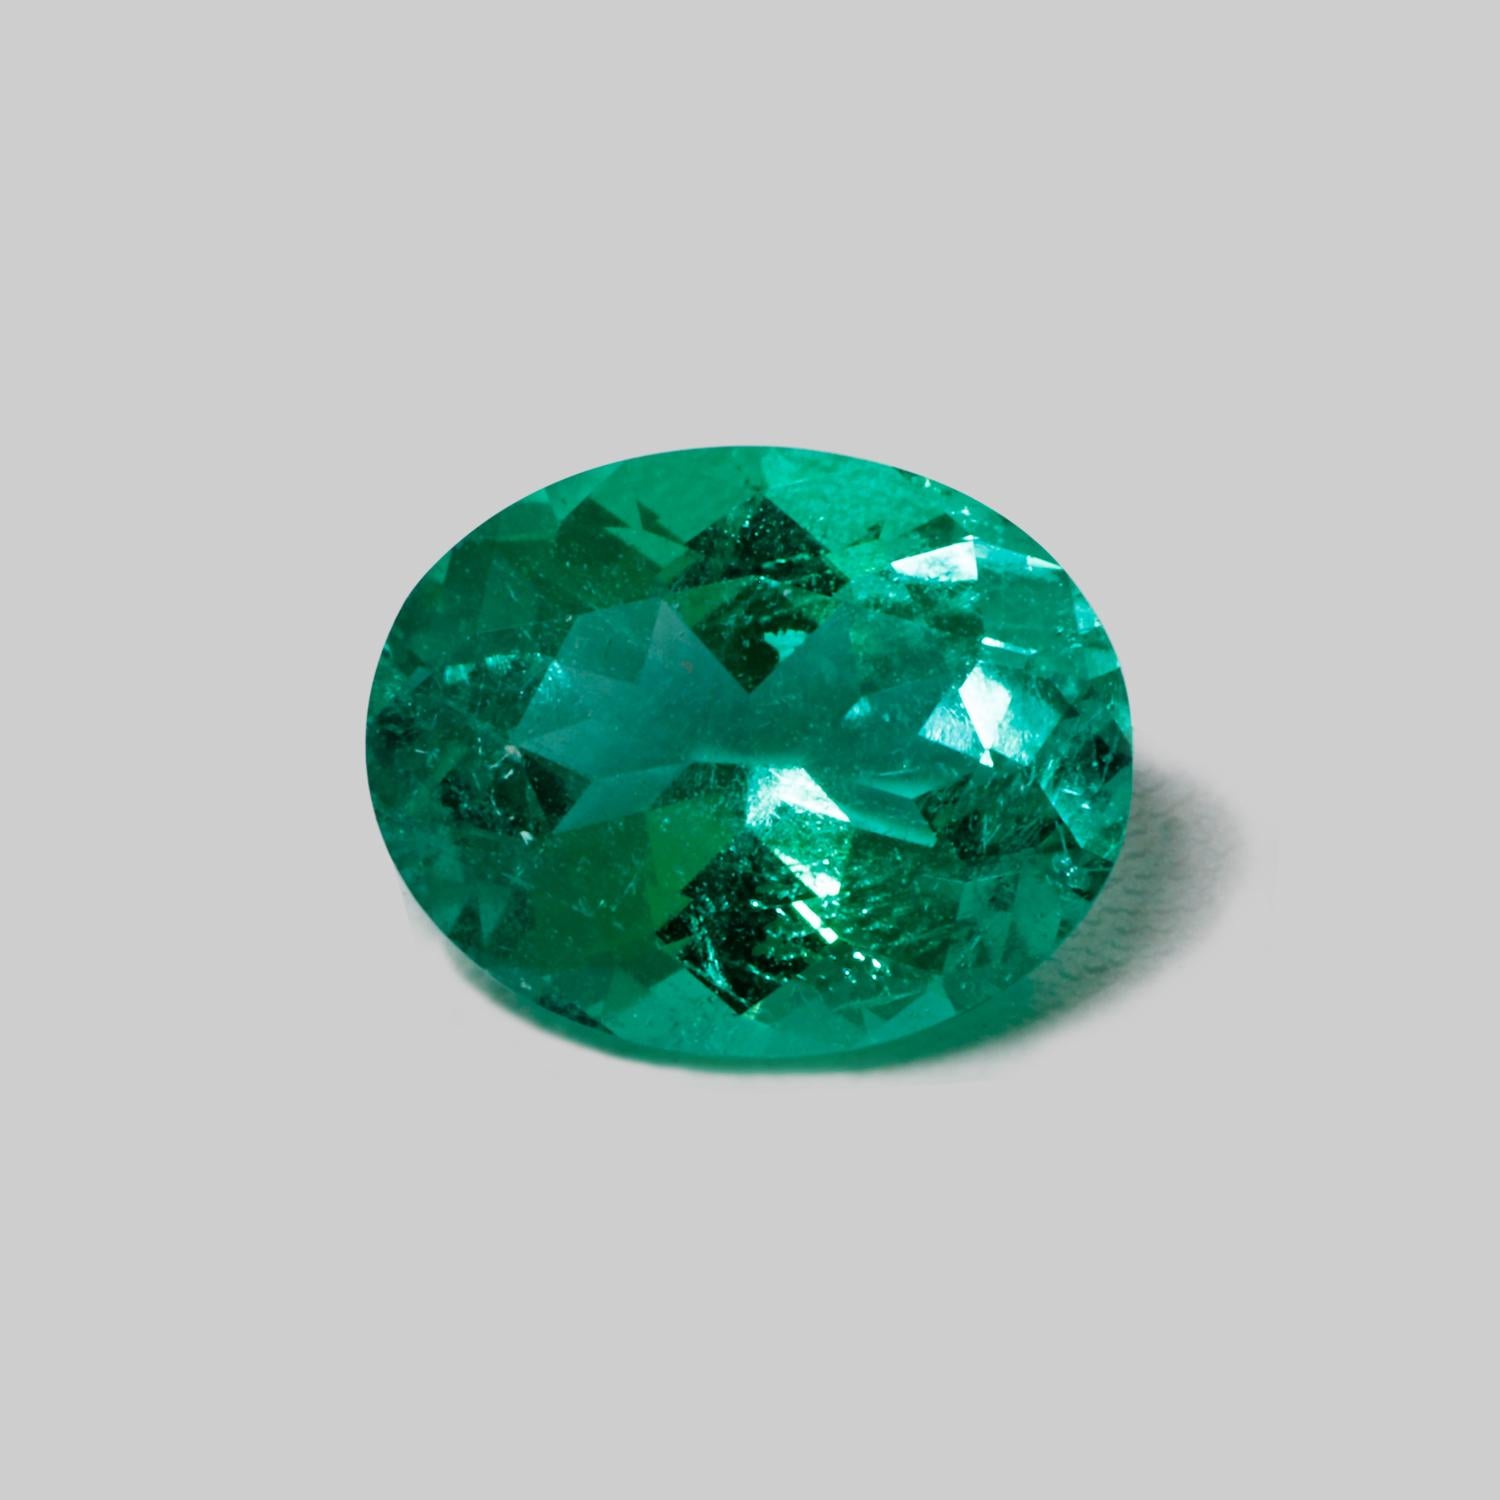 Sophisticated green color reveals the natural beauty of this beautiful oval Emerald from Colombia.
This exceptional quality gemstone would make a custom-made jewelry design. Perfect for Ring!

Shape - Oval
Weight - 1.78
Treatment - Minor